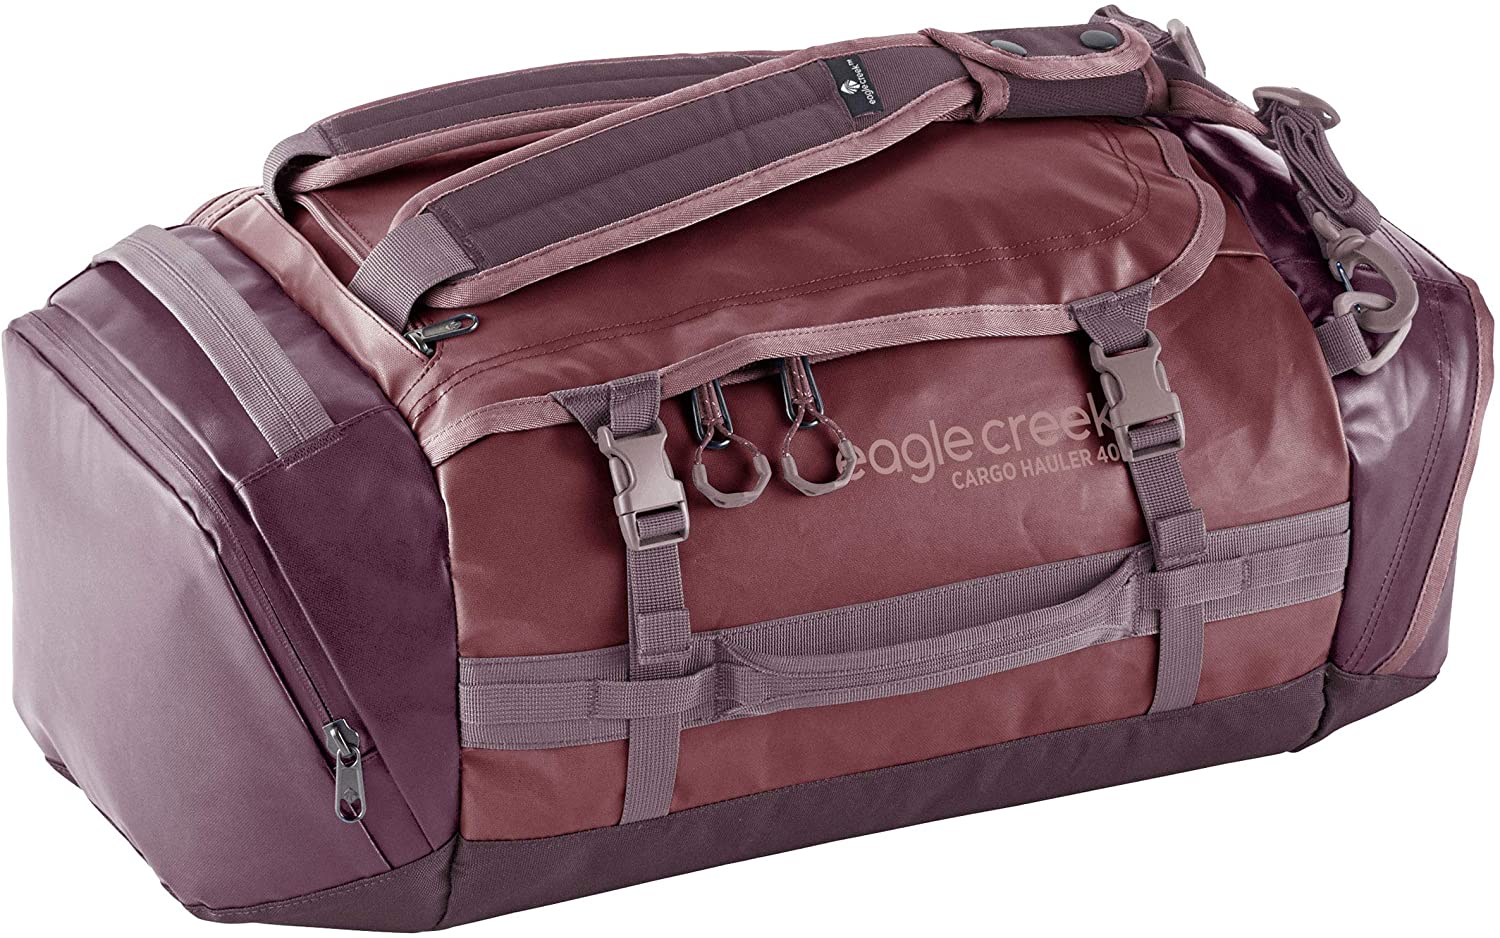 Eagle Creek Cargo Hauler Duffel 40L in Earth Red color from the front